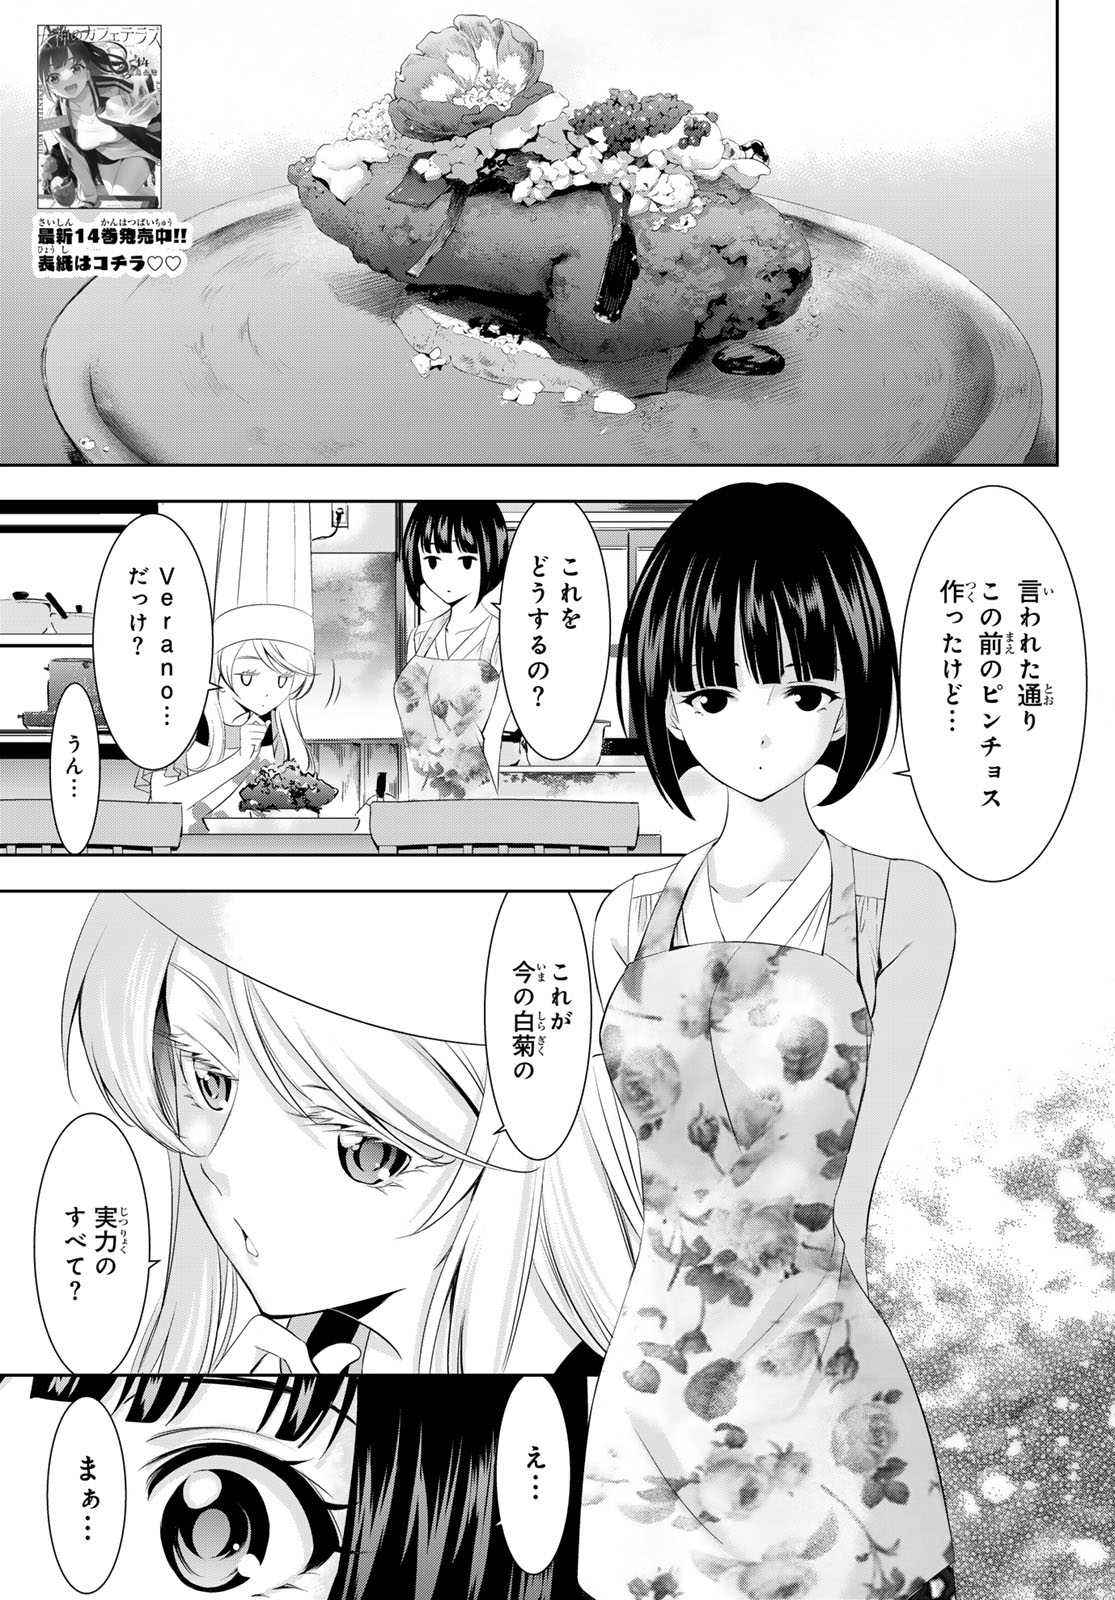 Megami no Cafe Terace - Chapter 143 - Page 3